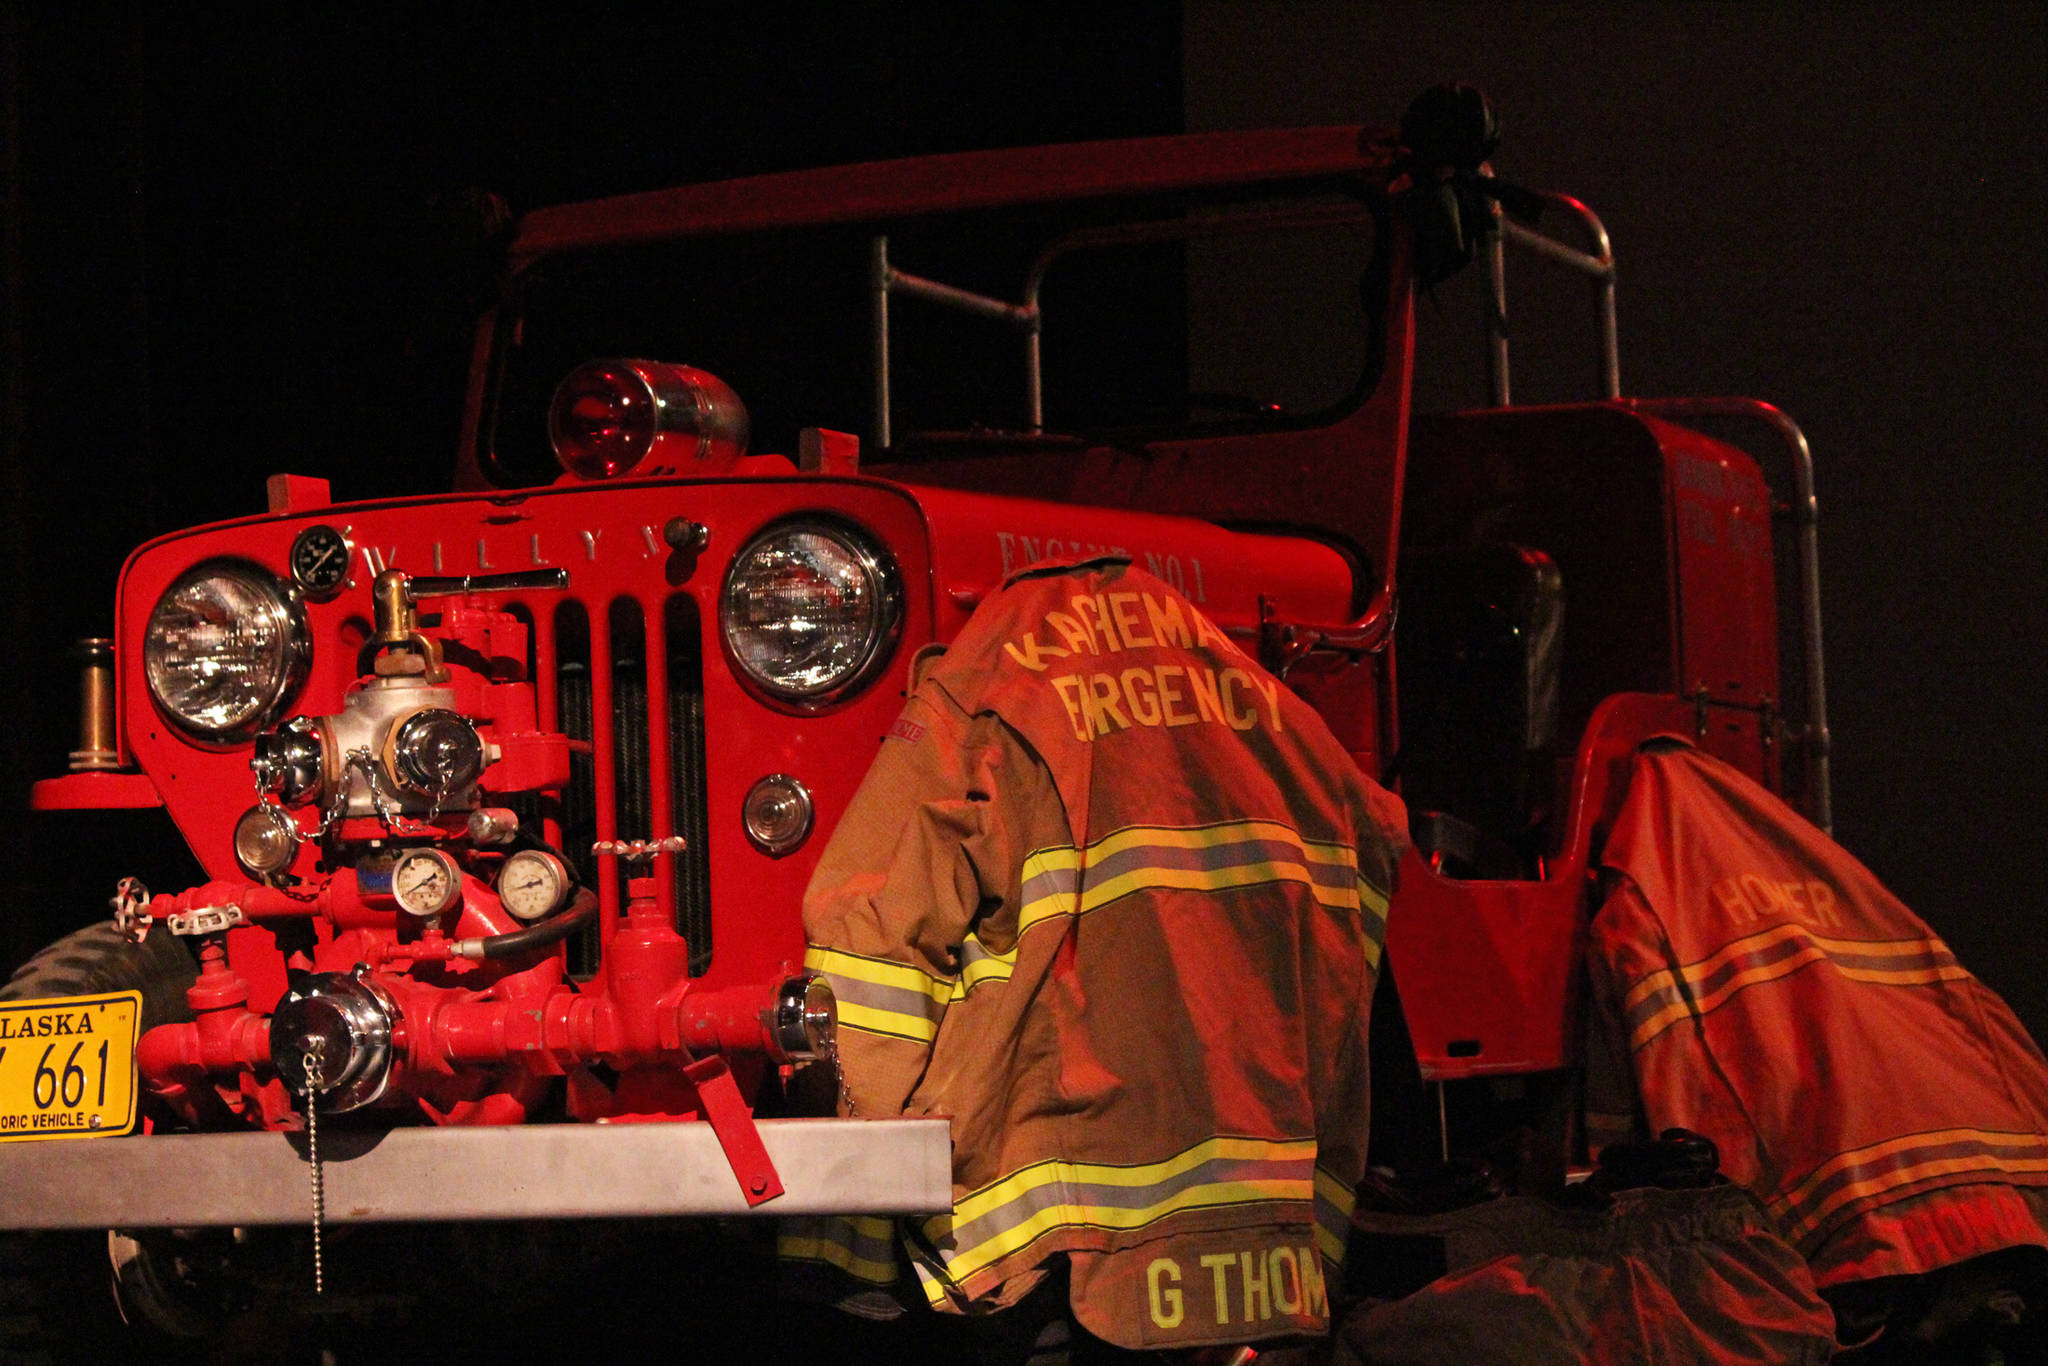 The firefighter uniforms for Gary Thomas, a former volunteer firefighter who was killed in a water heater explosion this month, hang on an antique fire truck in the Homer Mariner Theatre during a memorial for Thomas on Sunday, Jan. 19, 2020 at Homer High School in Homer, Alaska. (Photo by Megan Pacer/Homer News)